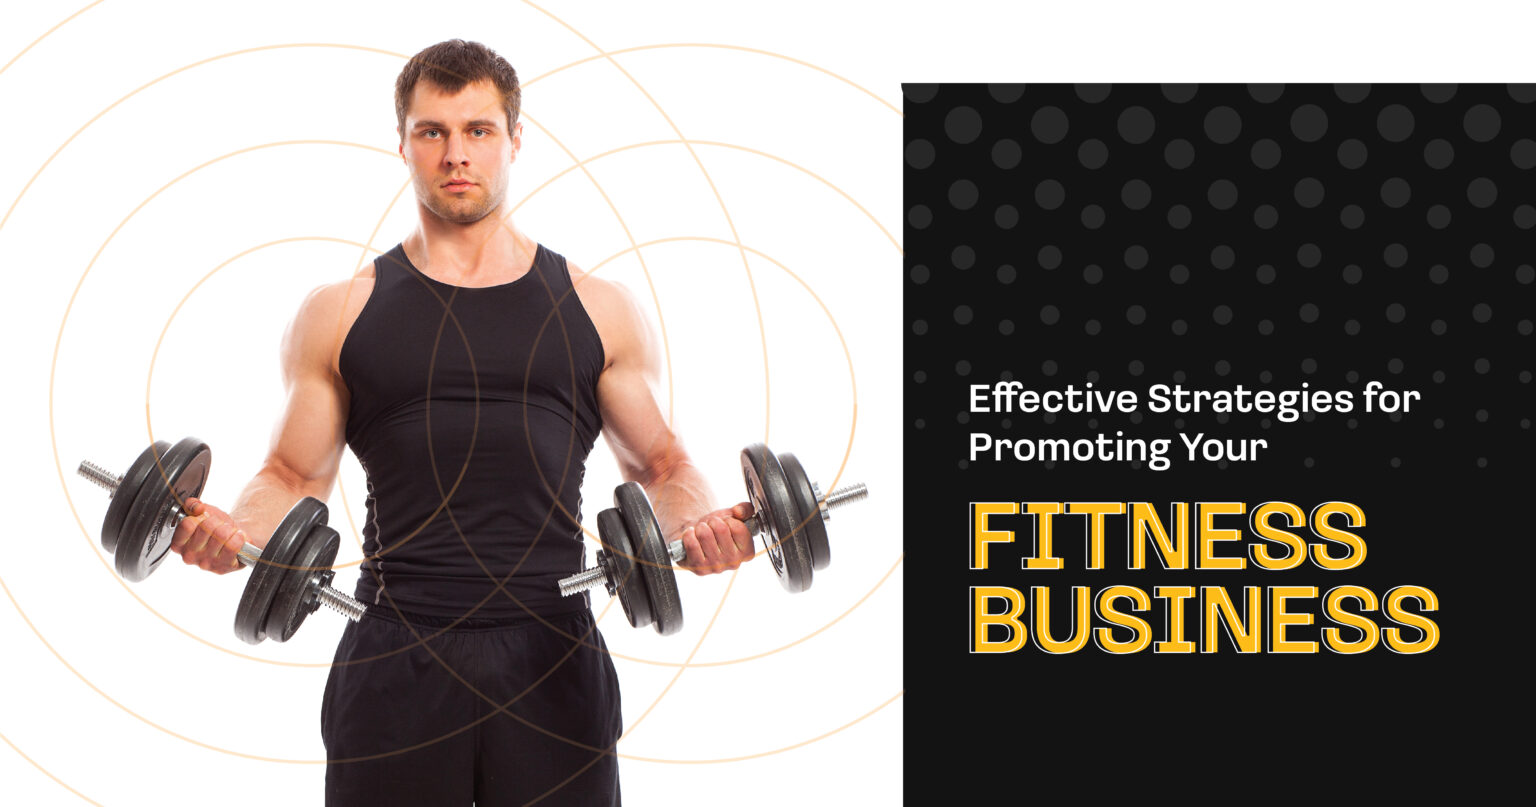 Promoting Your Fitness Business